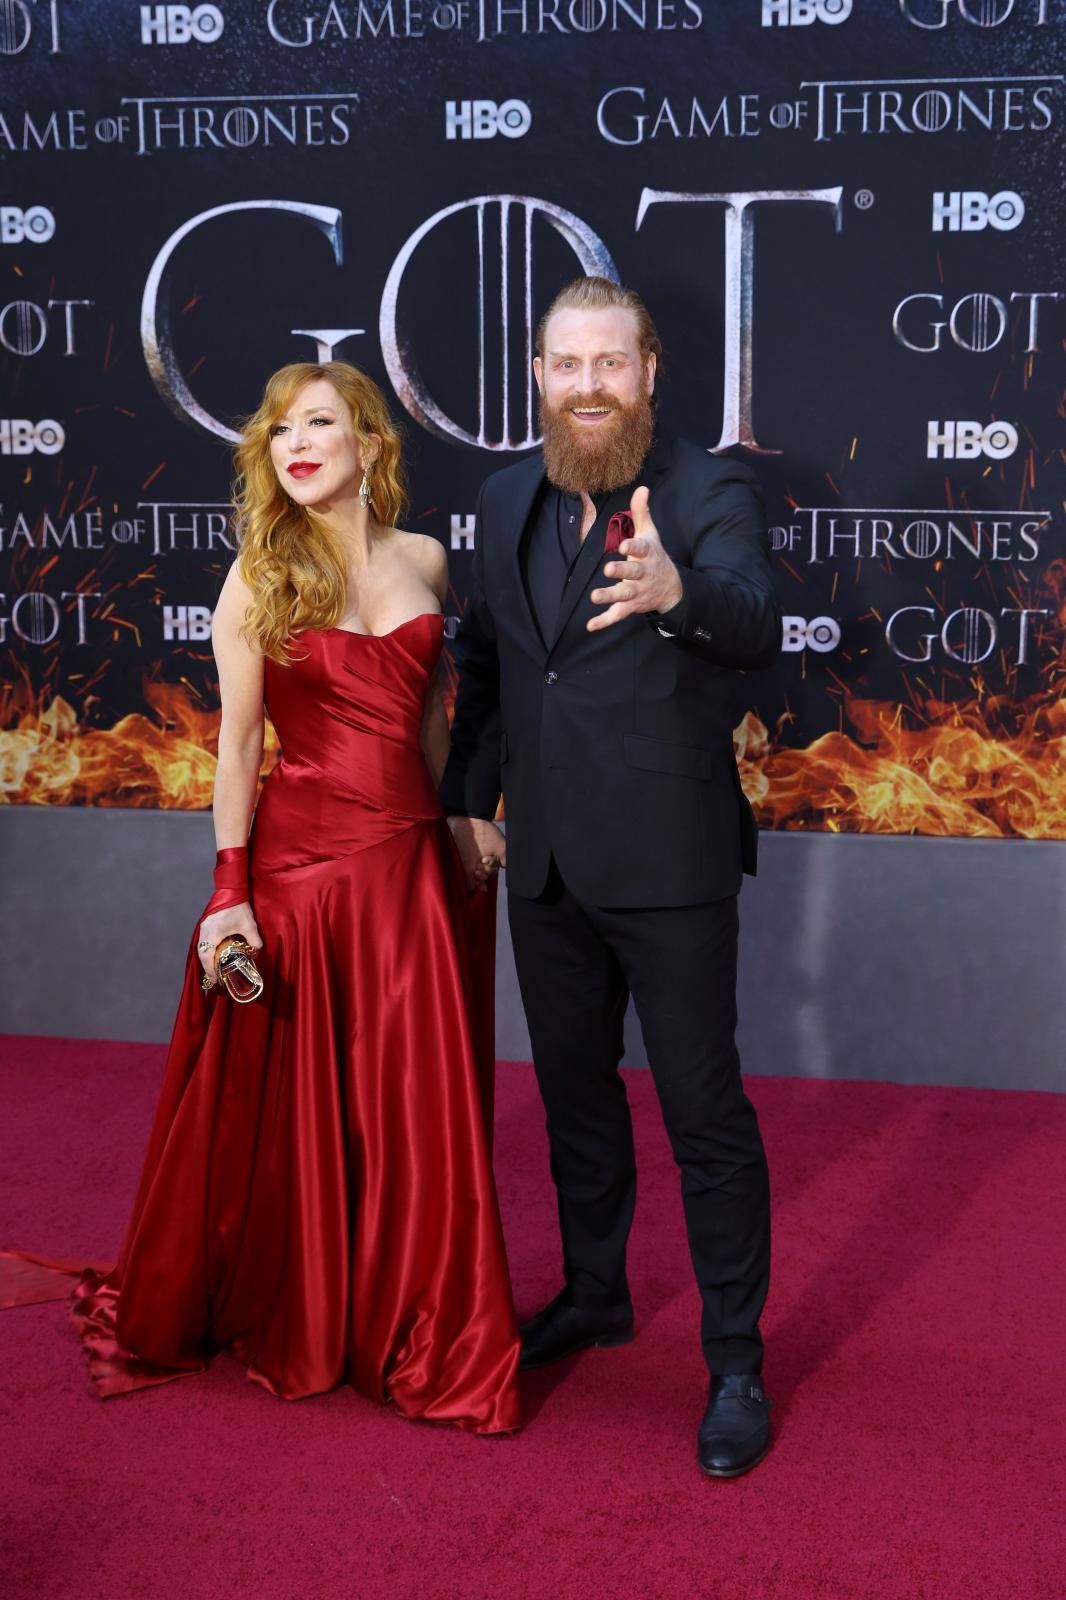 Kristofer Hivju and Molvaer Hivju arrive for the premiere of the final season of "Game of Thrones" at Radio City Music Hall in New York